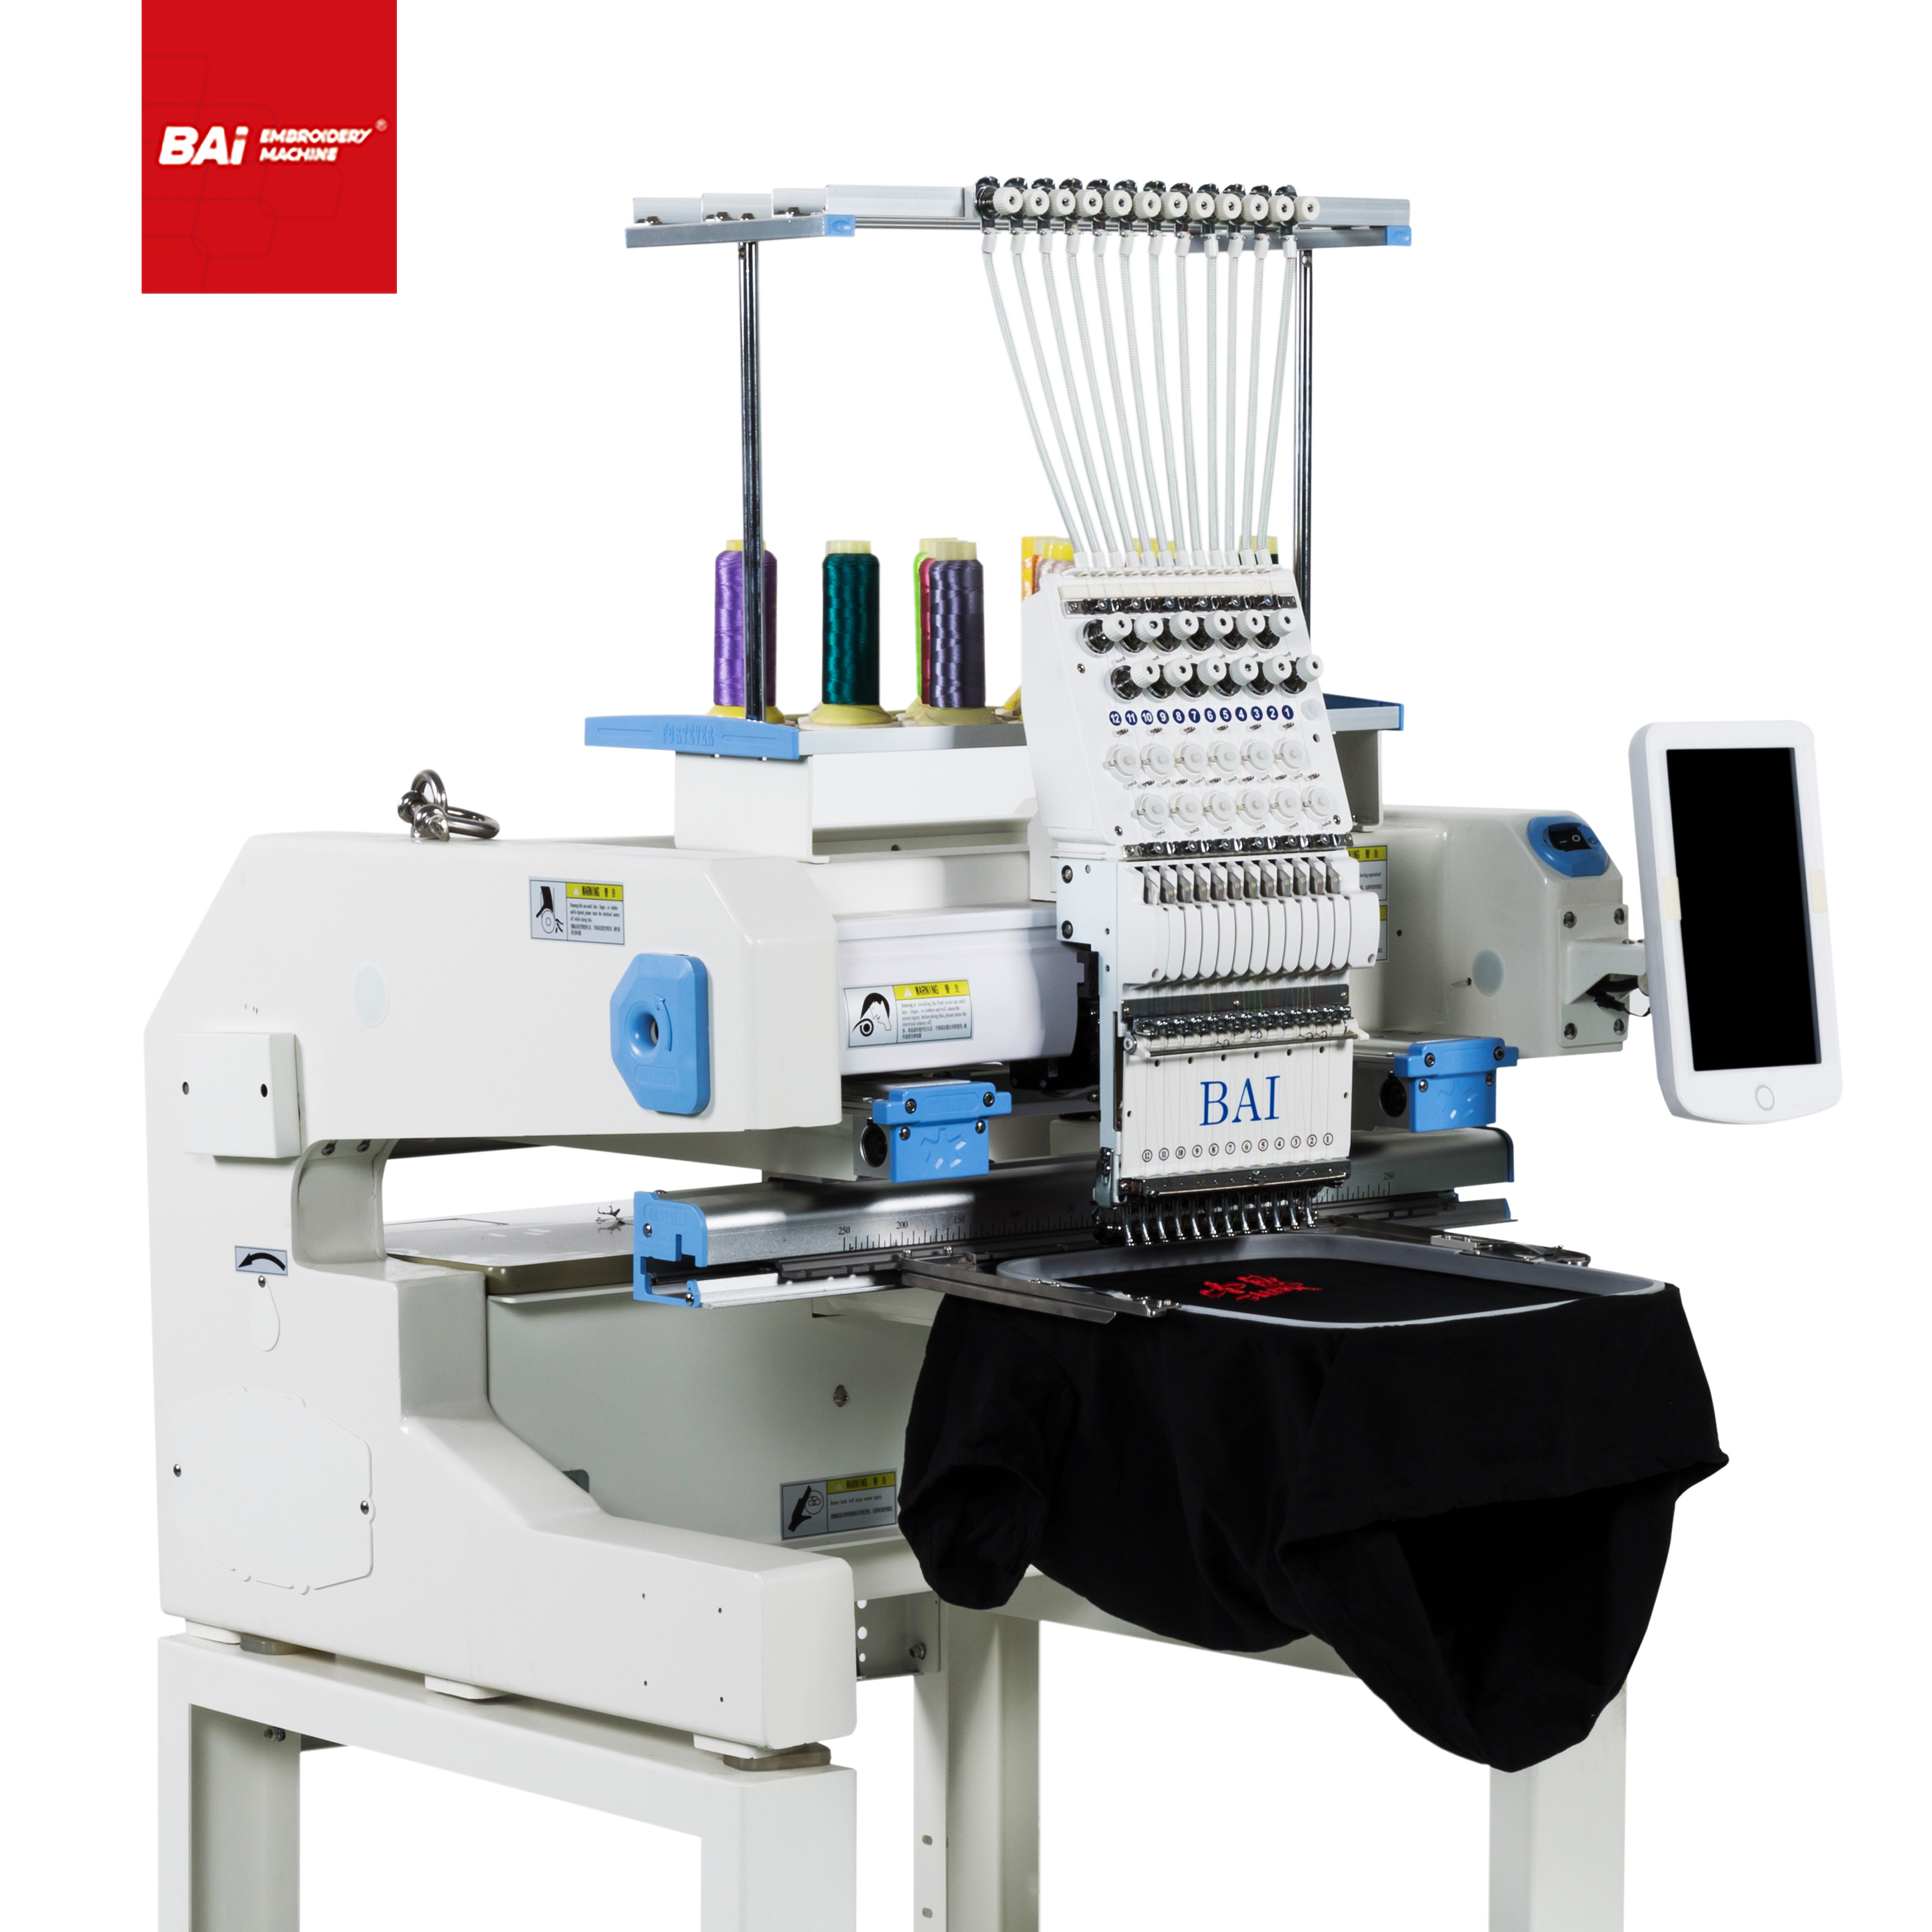 BAI Best Quality Embroidery Machine for Household Embroidery Machine with Price